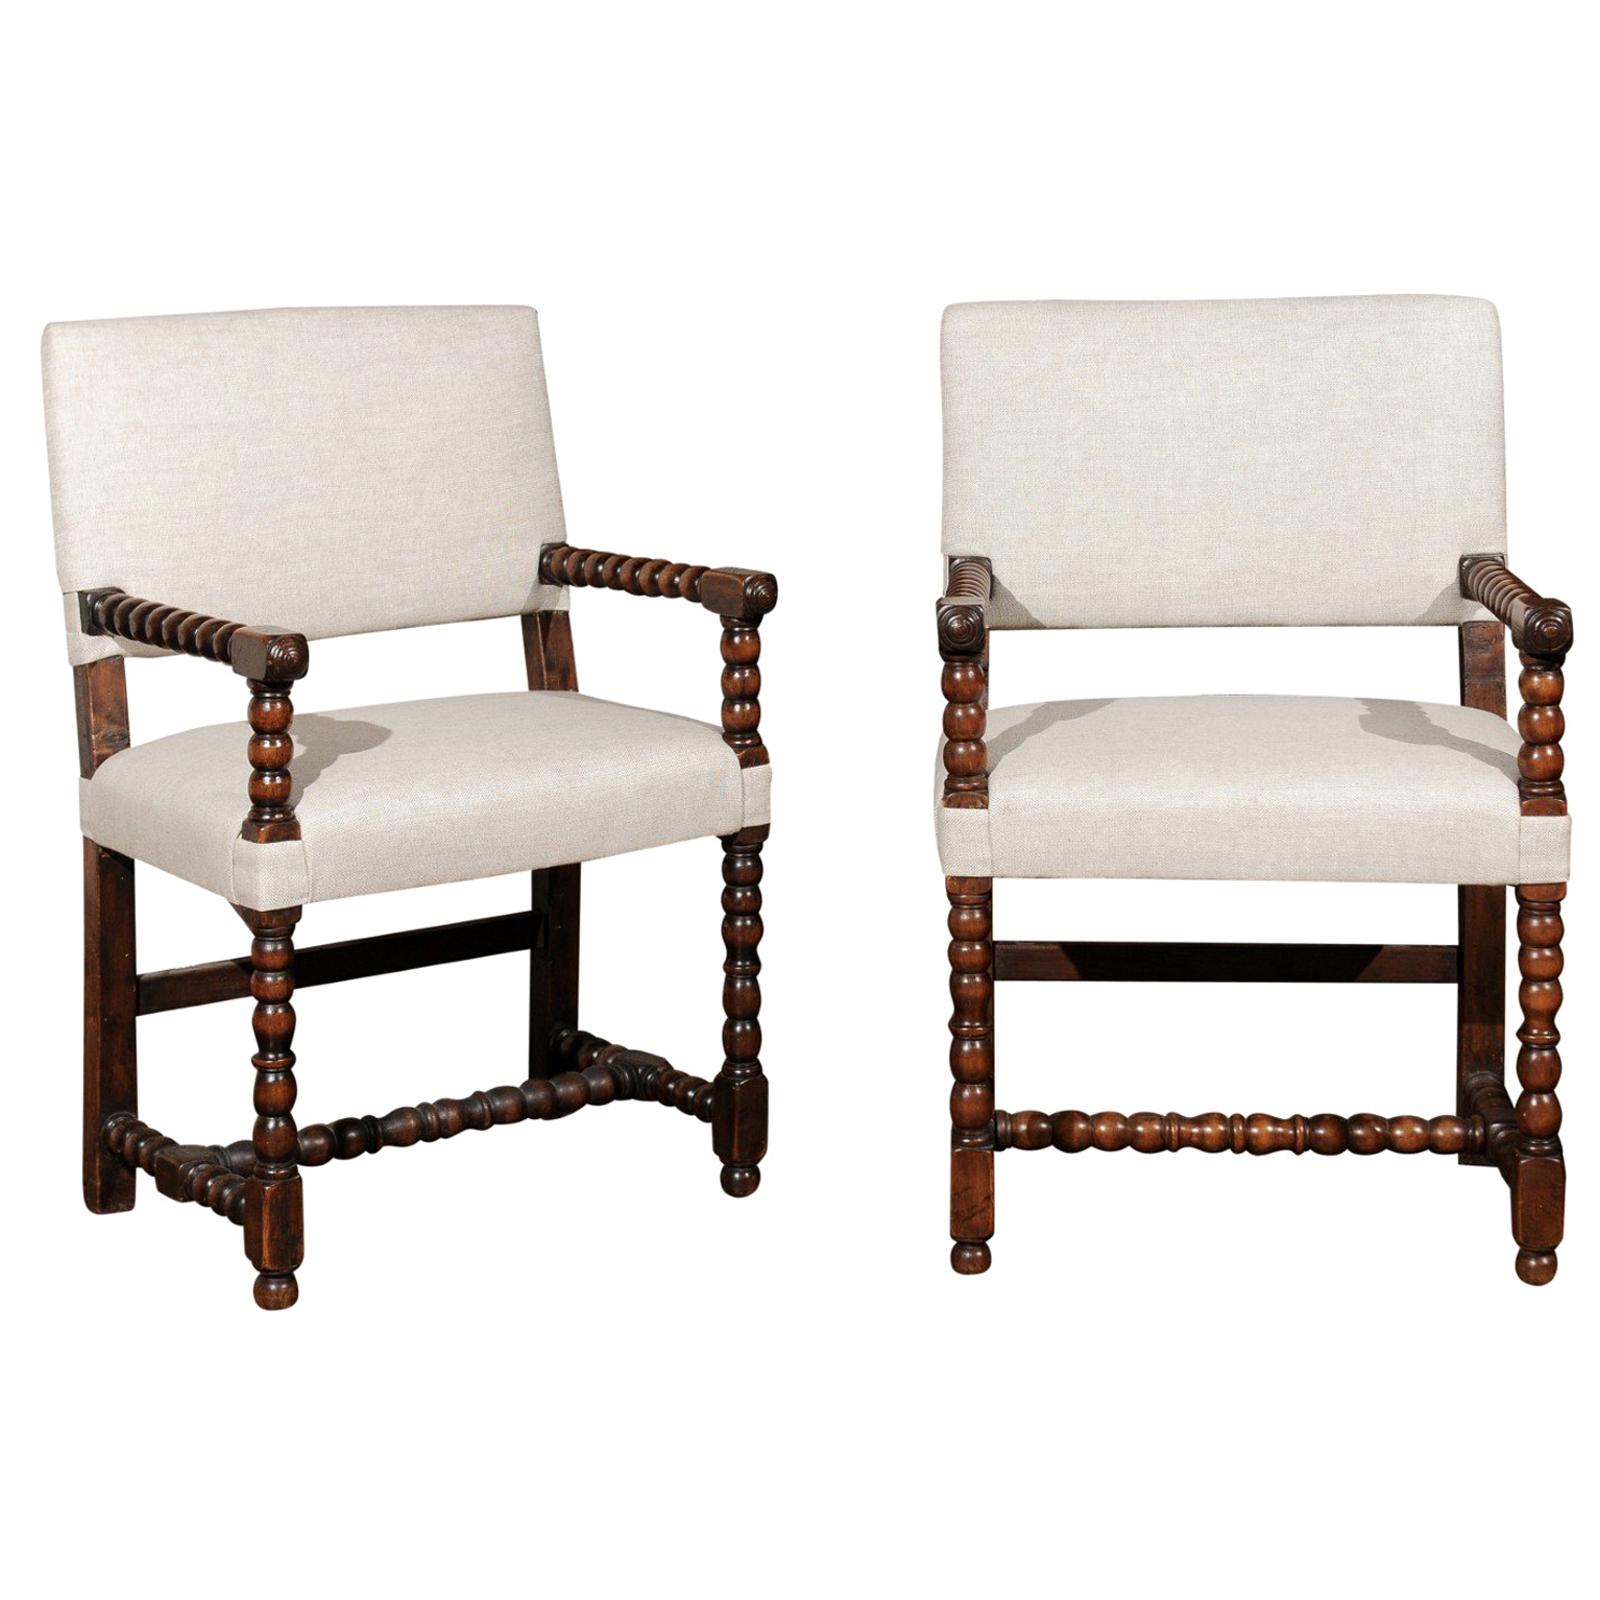 Pair of Italian Baroque Style Oak Armchairs with Bobbin Legs and New Upholstery